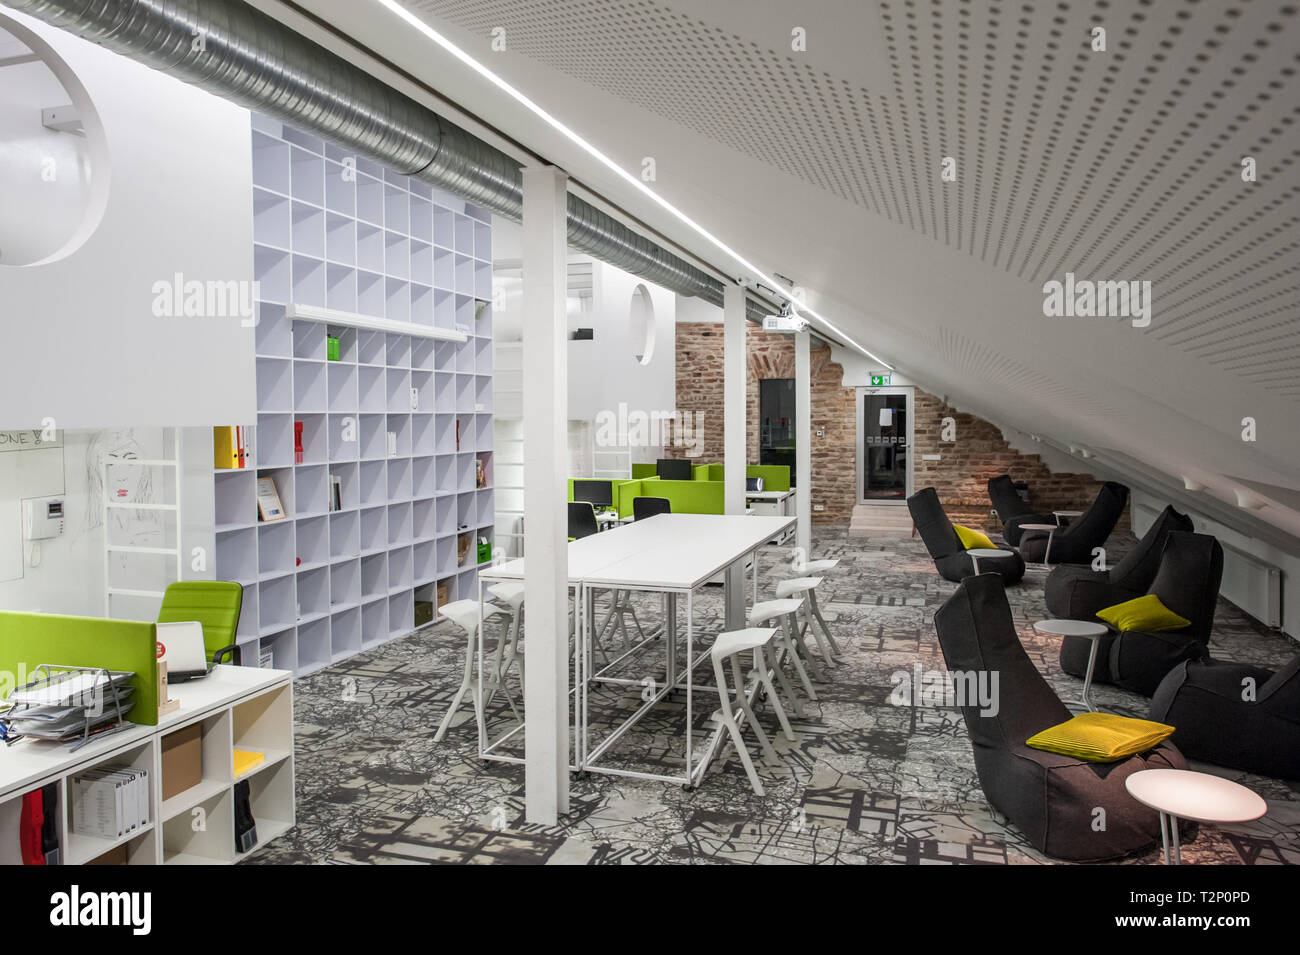 Minimalist interior design in a modern office environment, perfect for young start ups. Stock Photo